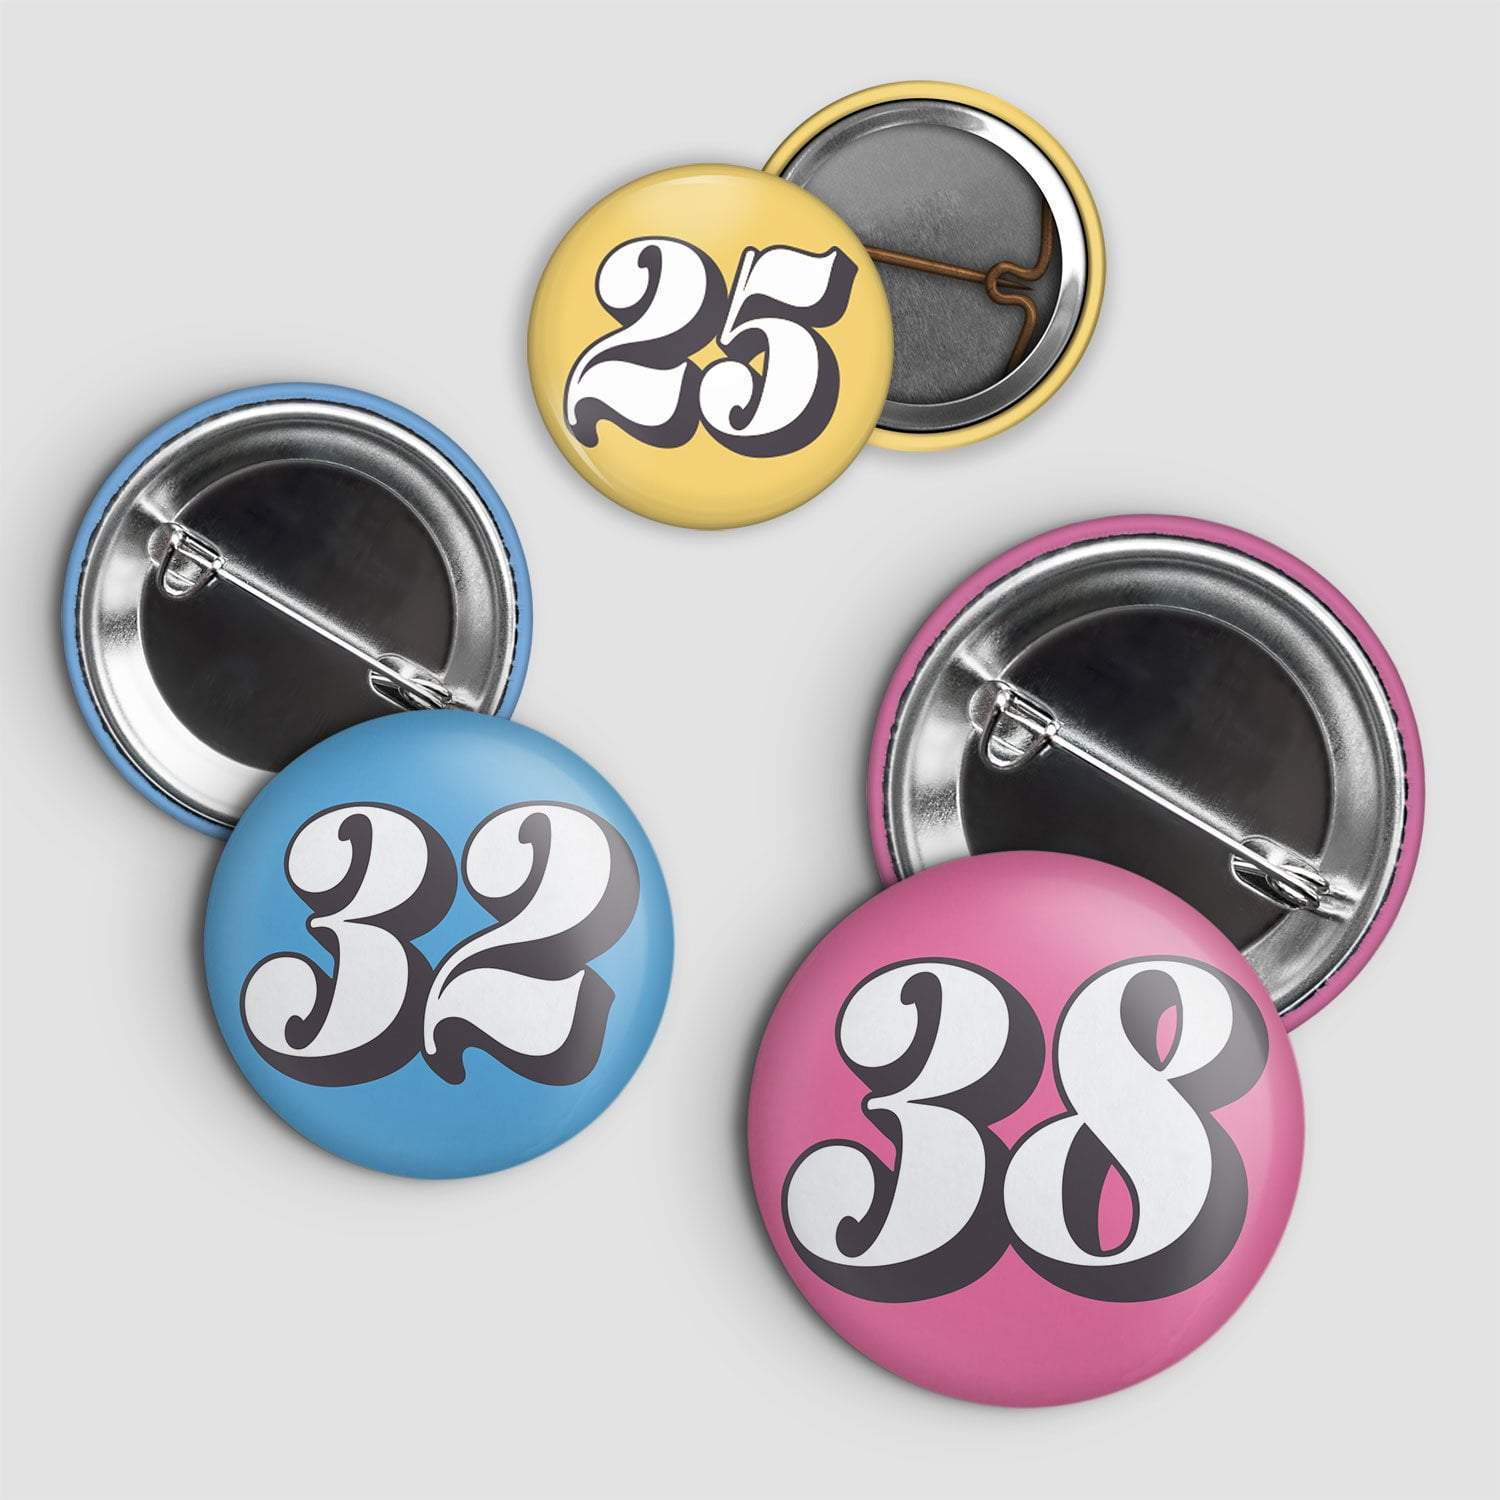 Buy Customized Round Pin Metal Button Badges Online - Dot Badges